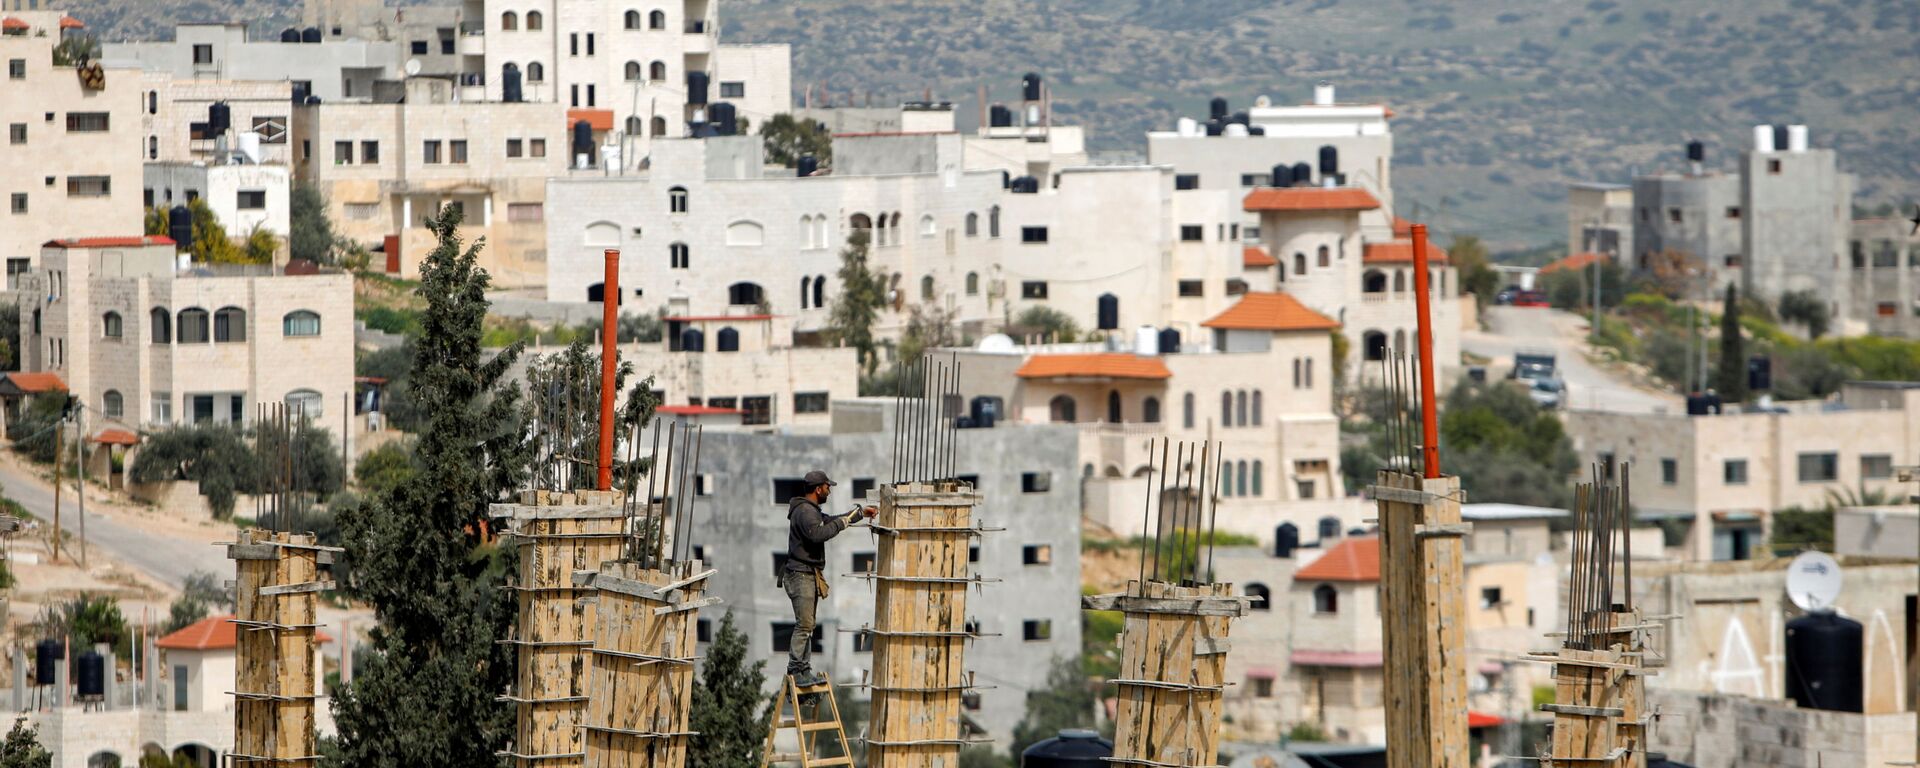 A Palestinian laborer works at the construction site of a house during a lockdown imposed to prevent the spread of the coronavirus disease (COVID-19), in Tubas in the Israeli-occupied West Bank March 15, 2021 - Sputnik International, 1920, 18.03.2021